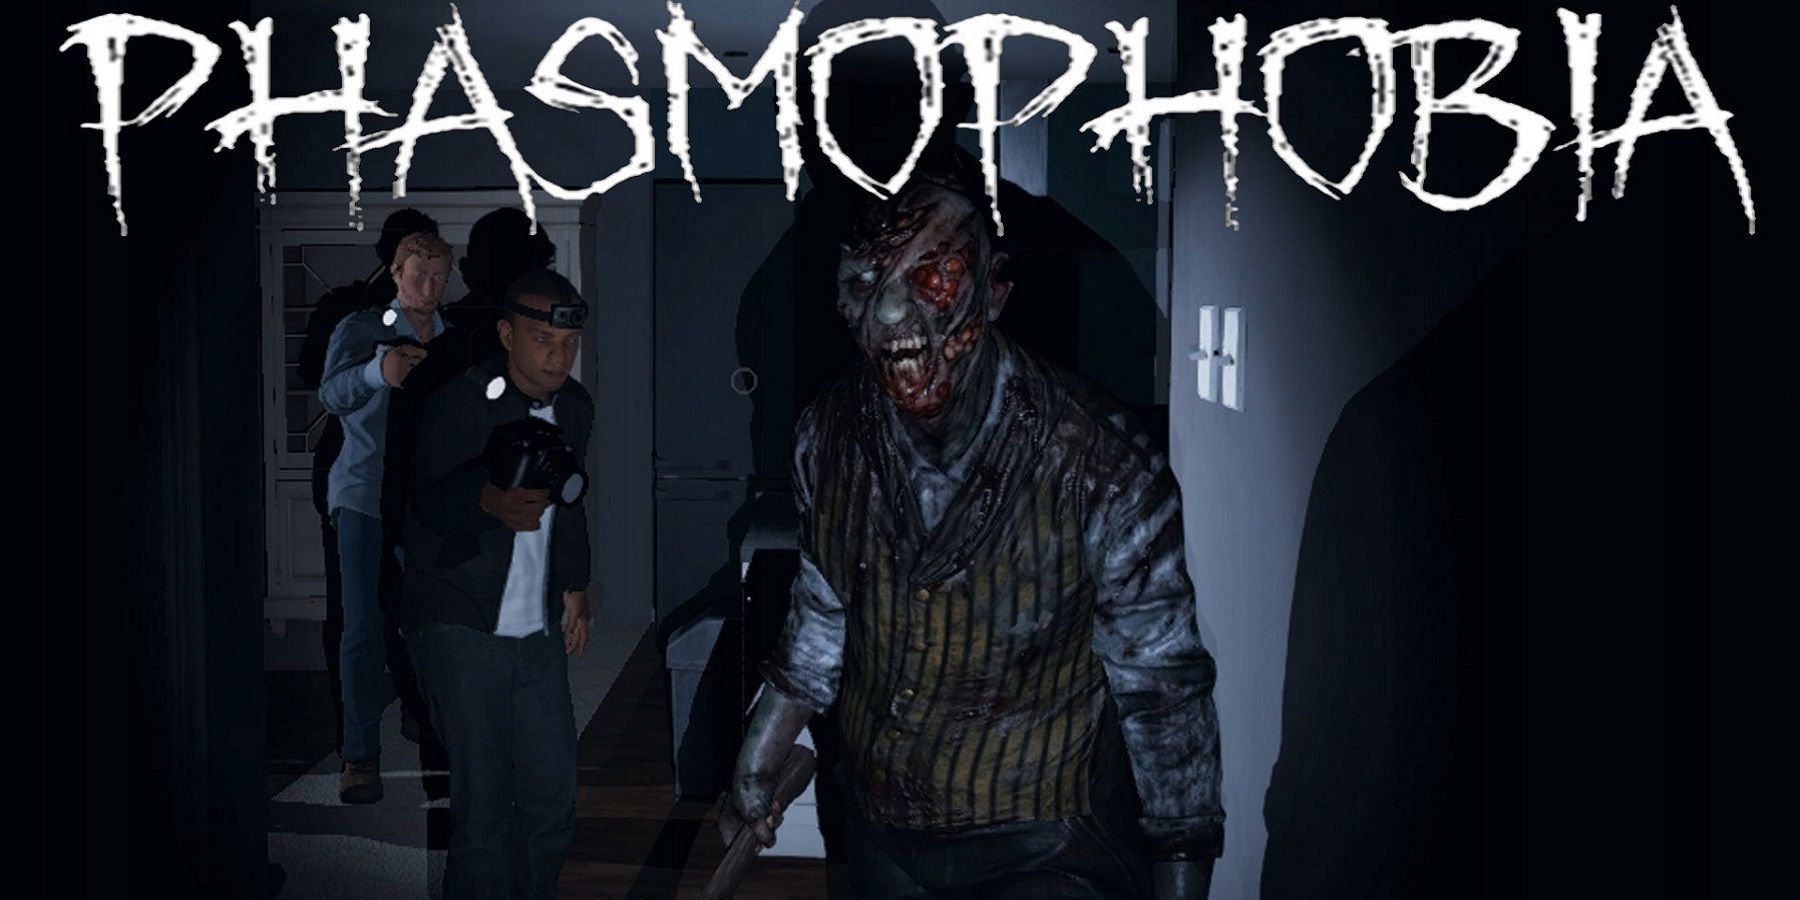 An image from Phasmophobia showing players appraoching a creepy looking ghost.